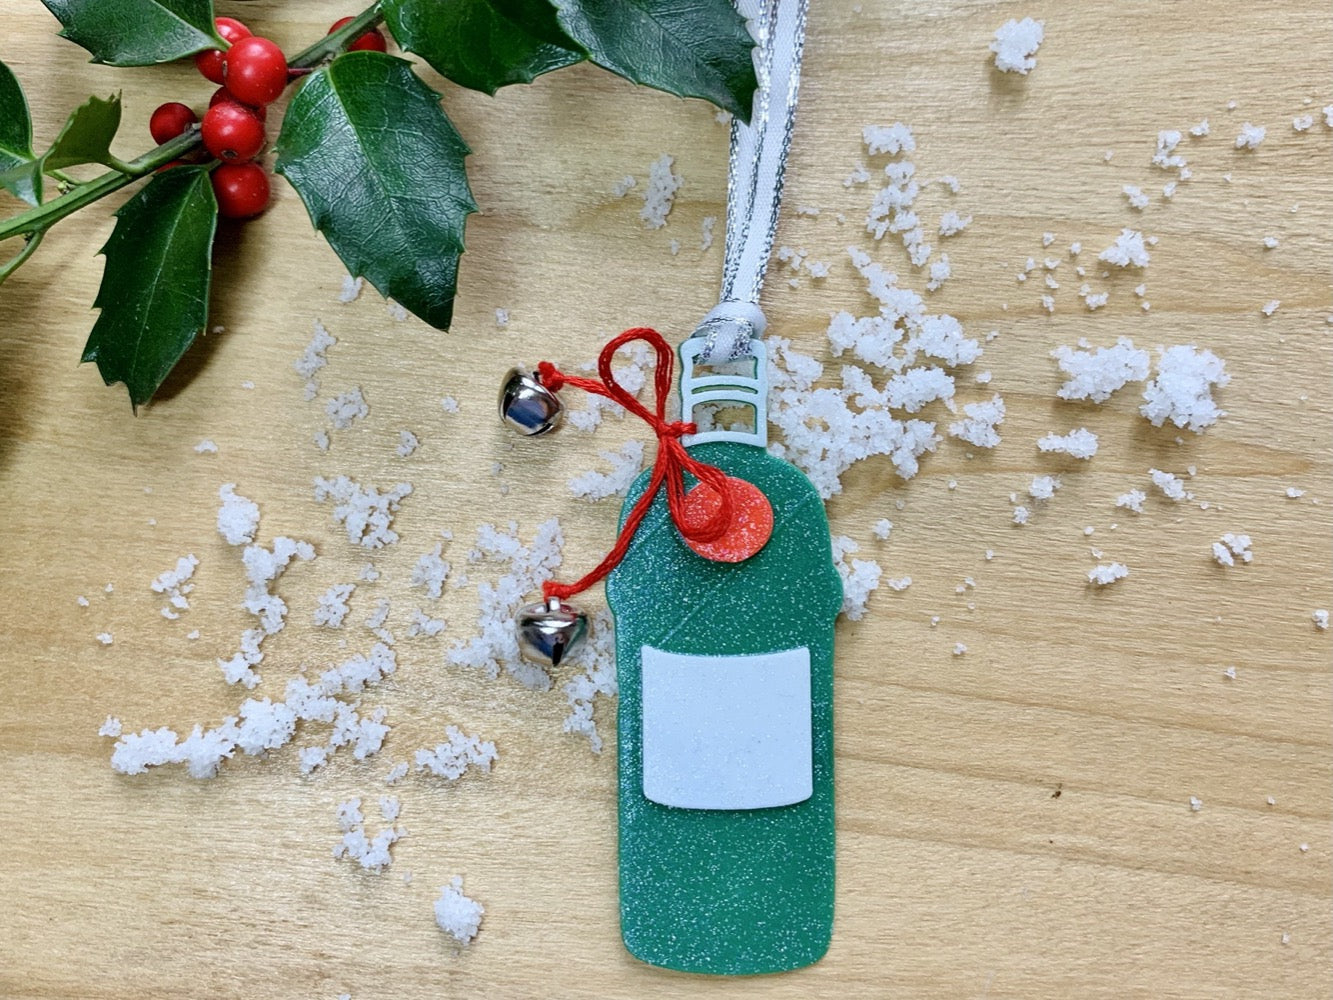 Shown on a wood background with a sprig of holly and white snow is a 3D printed R+D ornament. It is in the shape of a gin bottle: green with a white label and a red emblem. Tied around the neck is a red bow that has two jingle bells attached. The entire ornament is covered in glitter to give it a shimmer and shine.